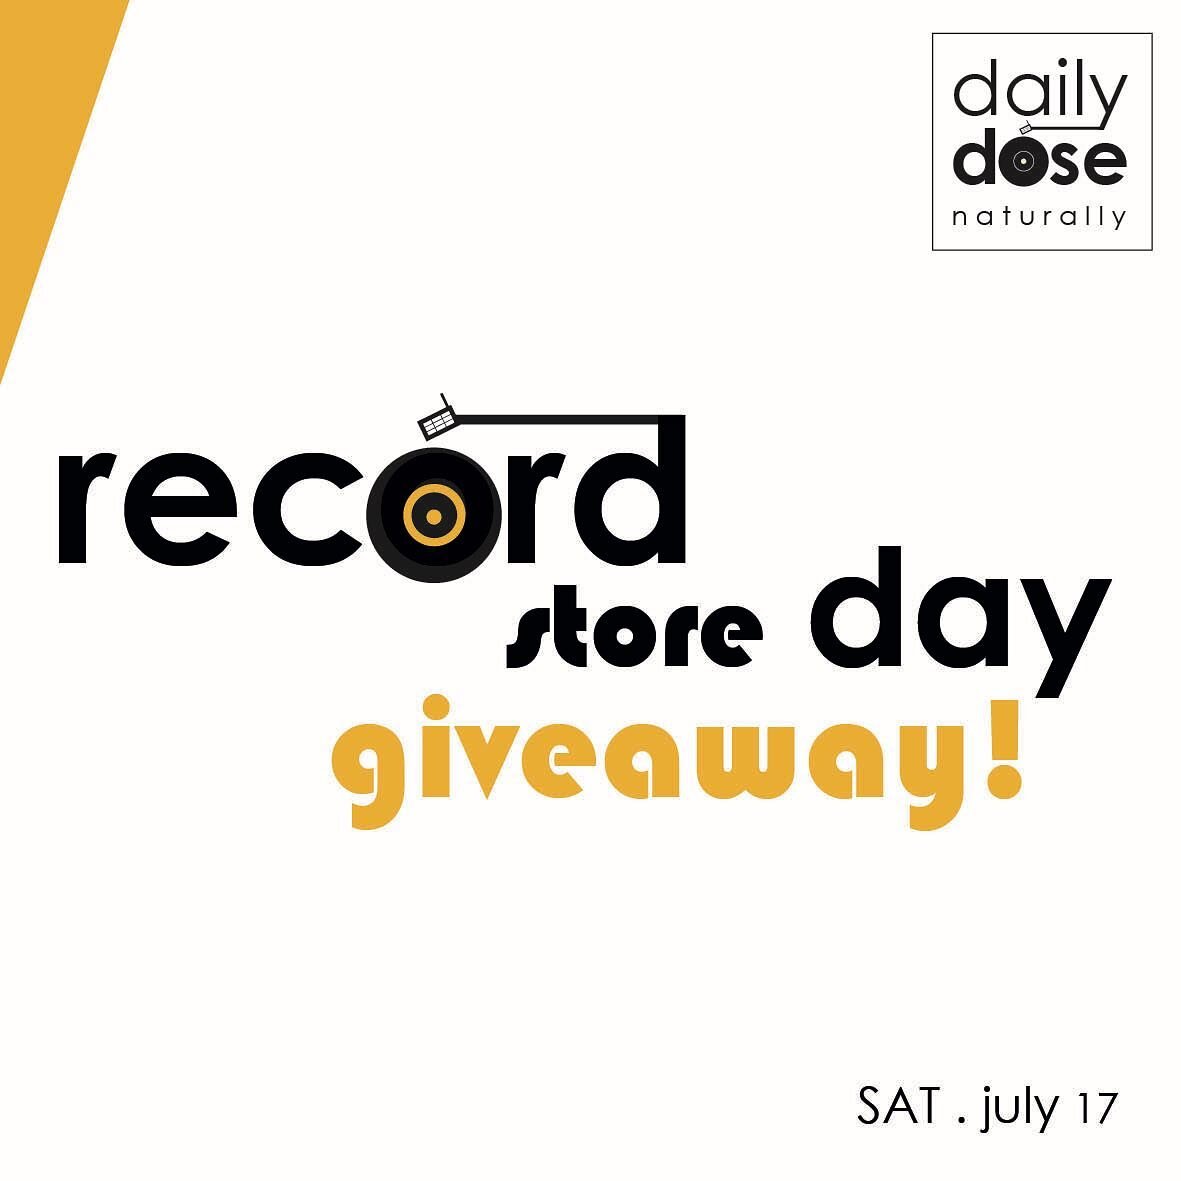 Happy Record Store Day, folks!

To highlight the occasion this time round, we are giving away one 54 gram LP sized jar of &ldquo;Don&rsquo;t Look Back on Odour&rdquo; deodorant putty! 

To enter, please follow these steps:

1. Like this post

2. Shar